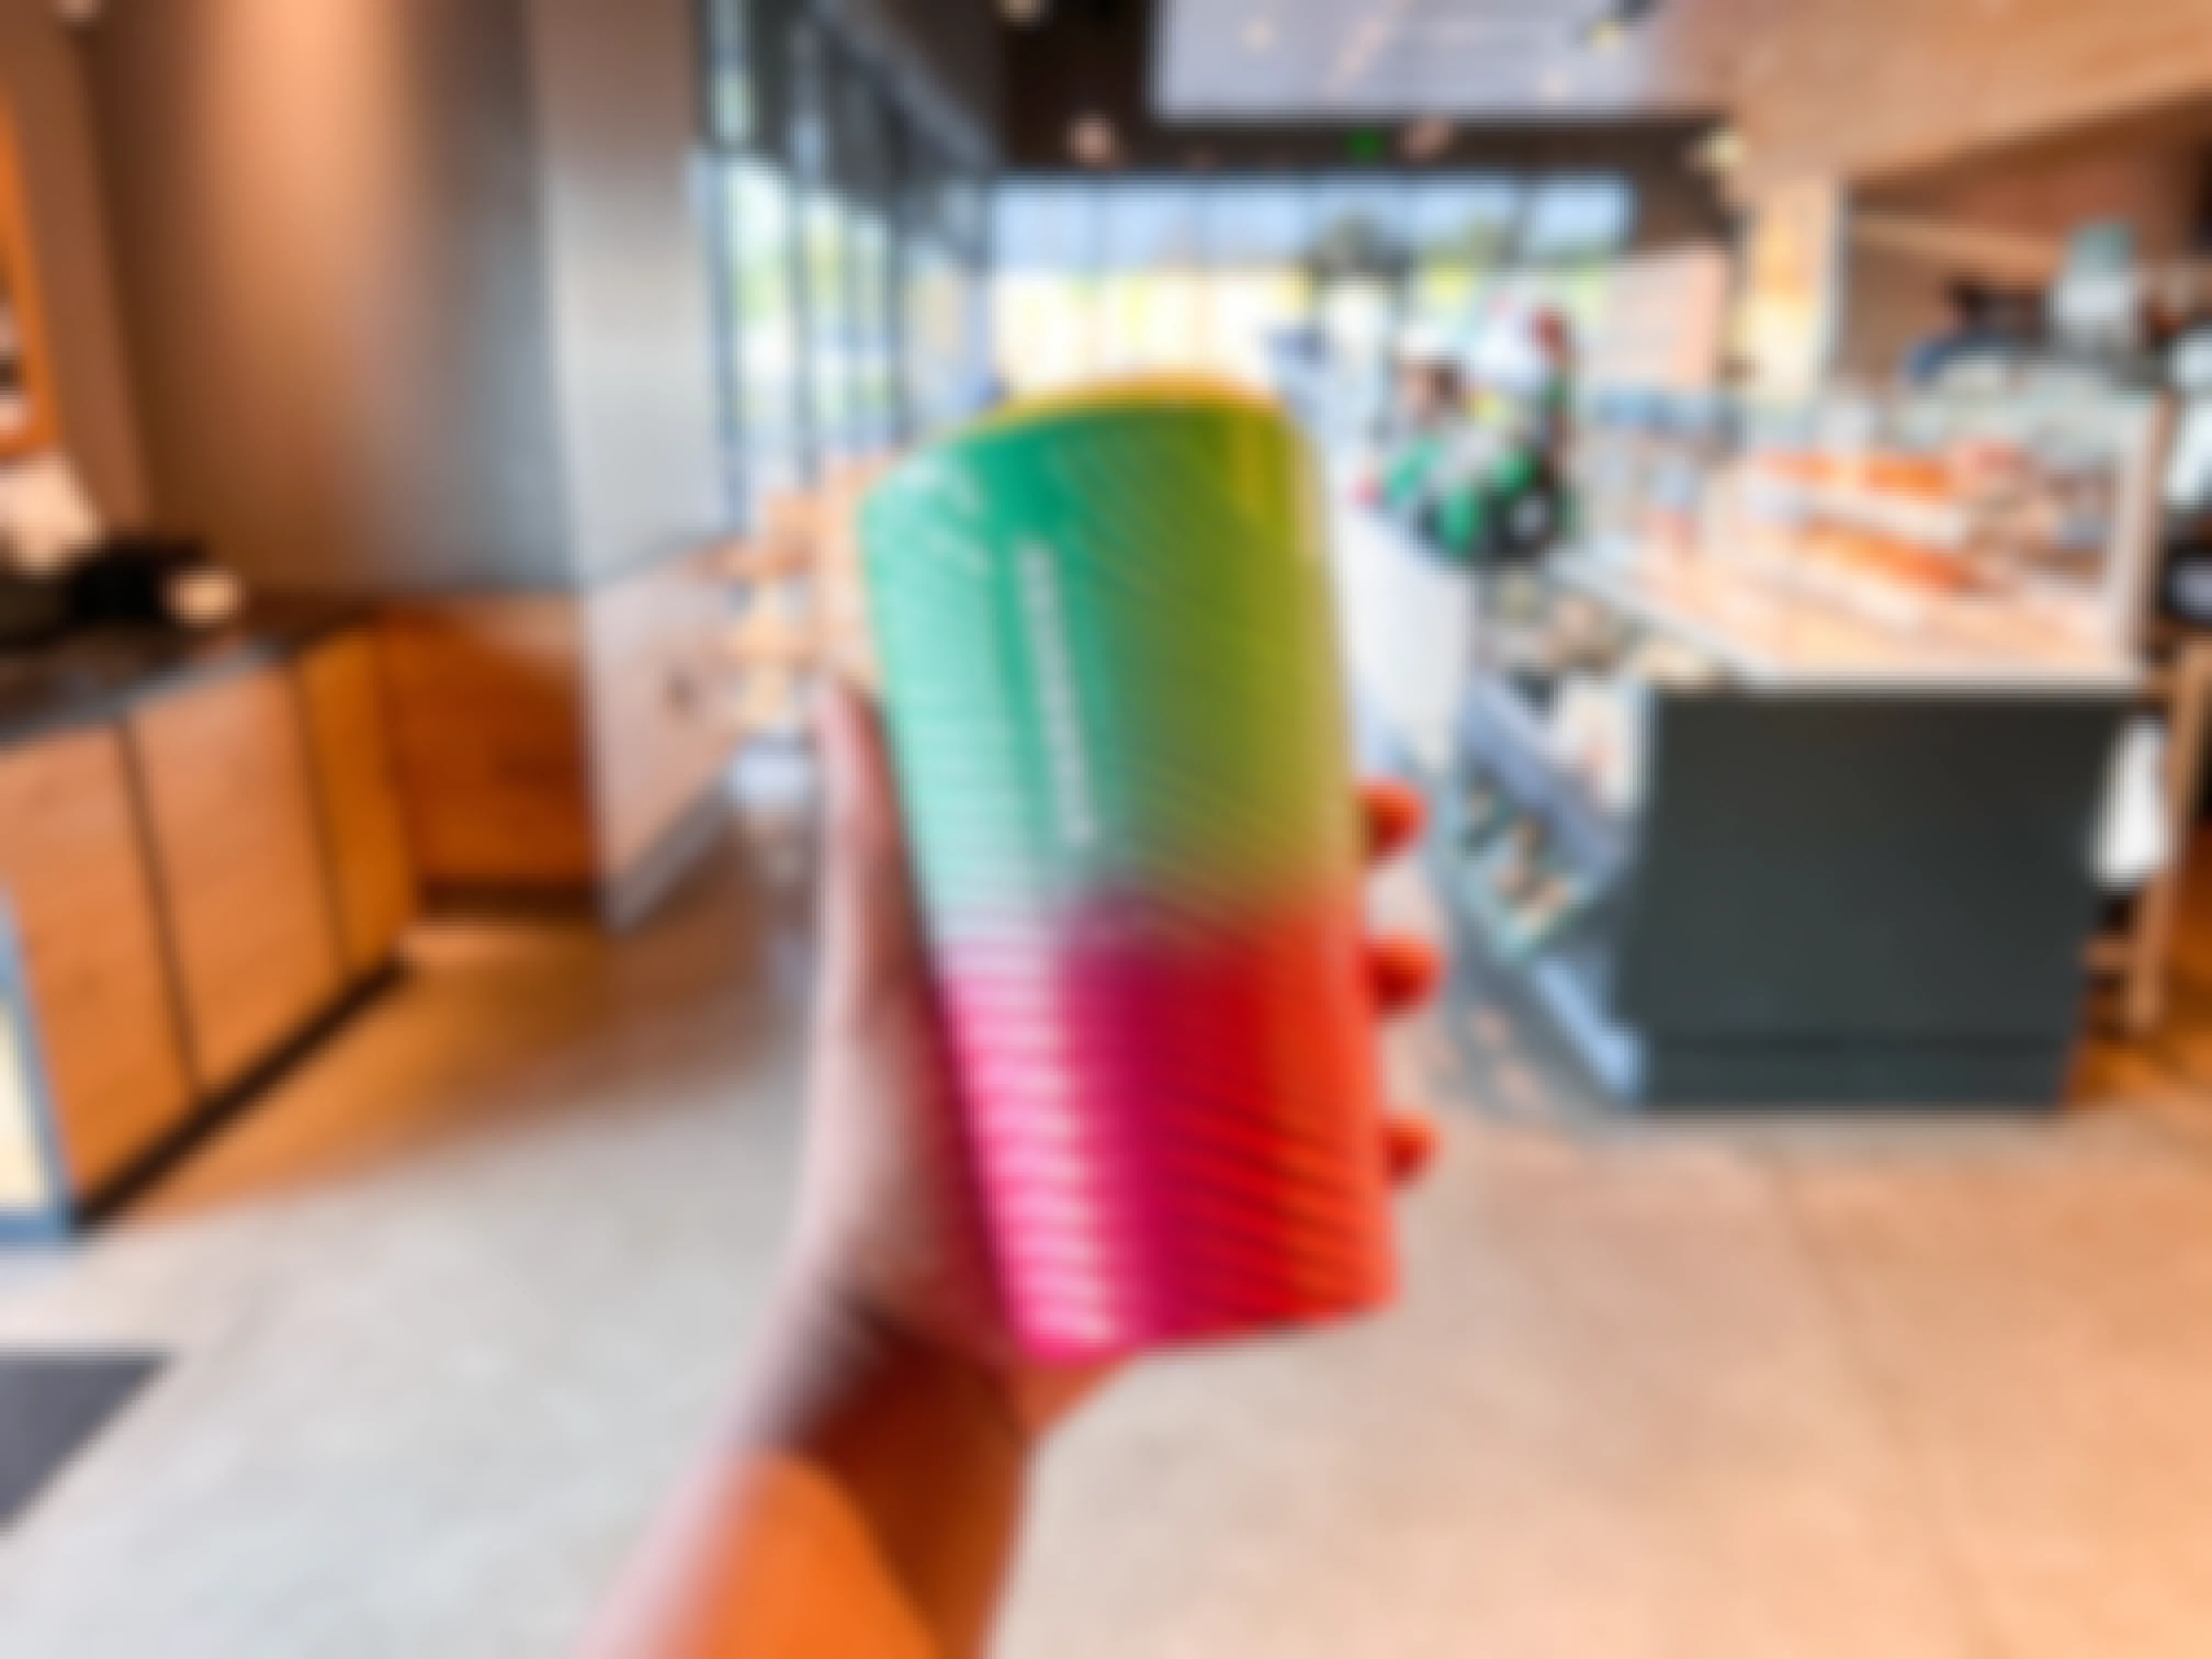 3-d molded gradient cup from starbucks